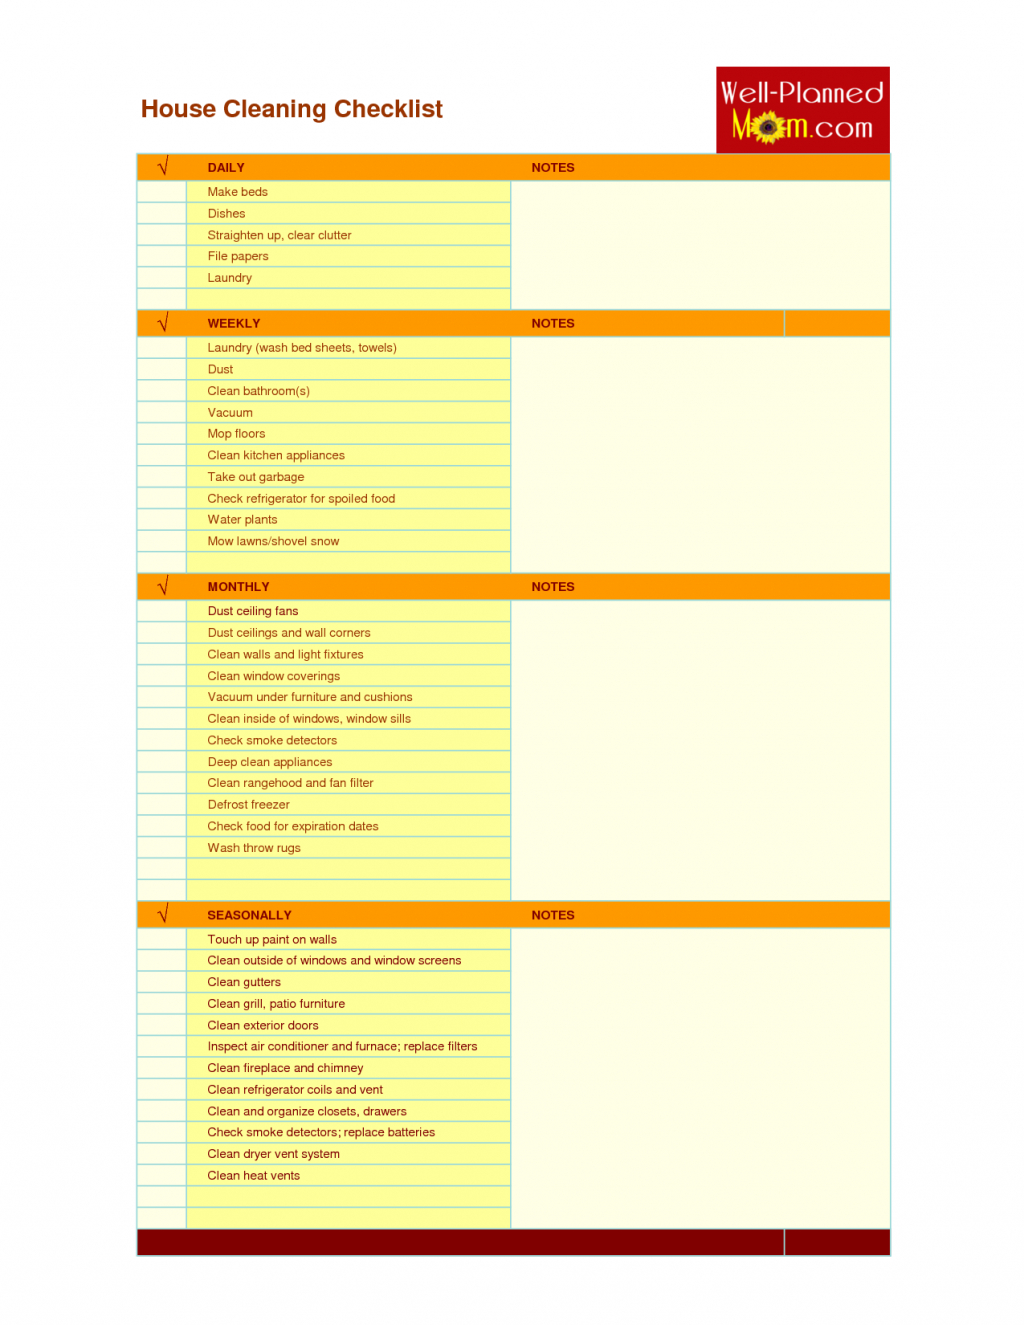 office-housekeeping-checklist-spreadsheet-regarding-office-cleaning-checklist-sample-commercial